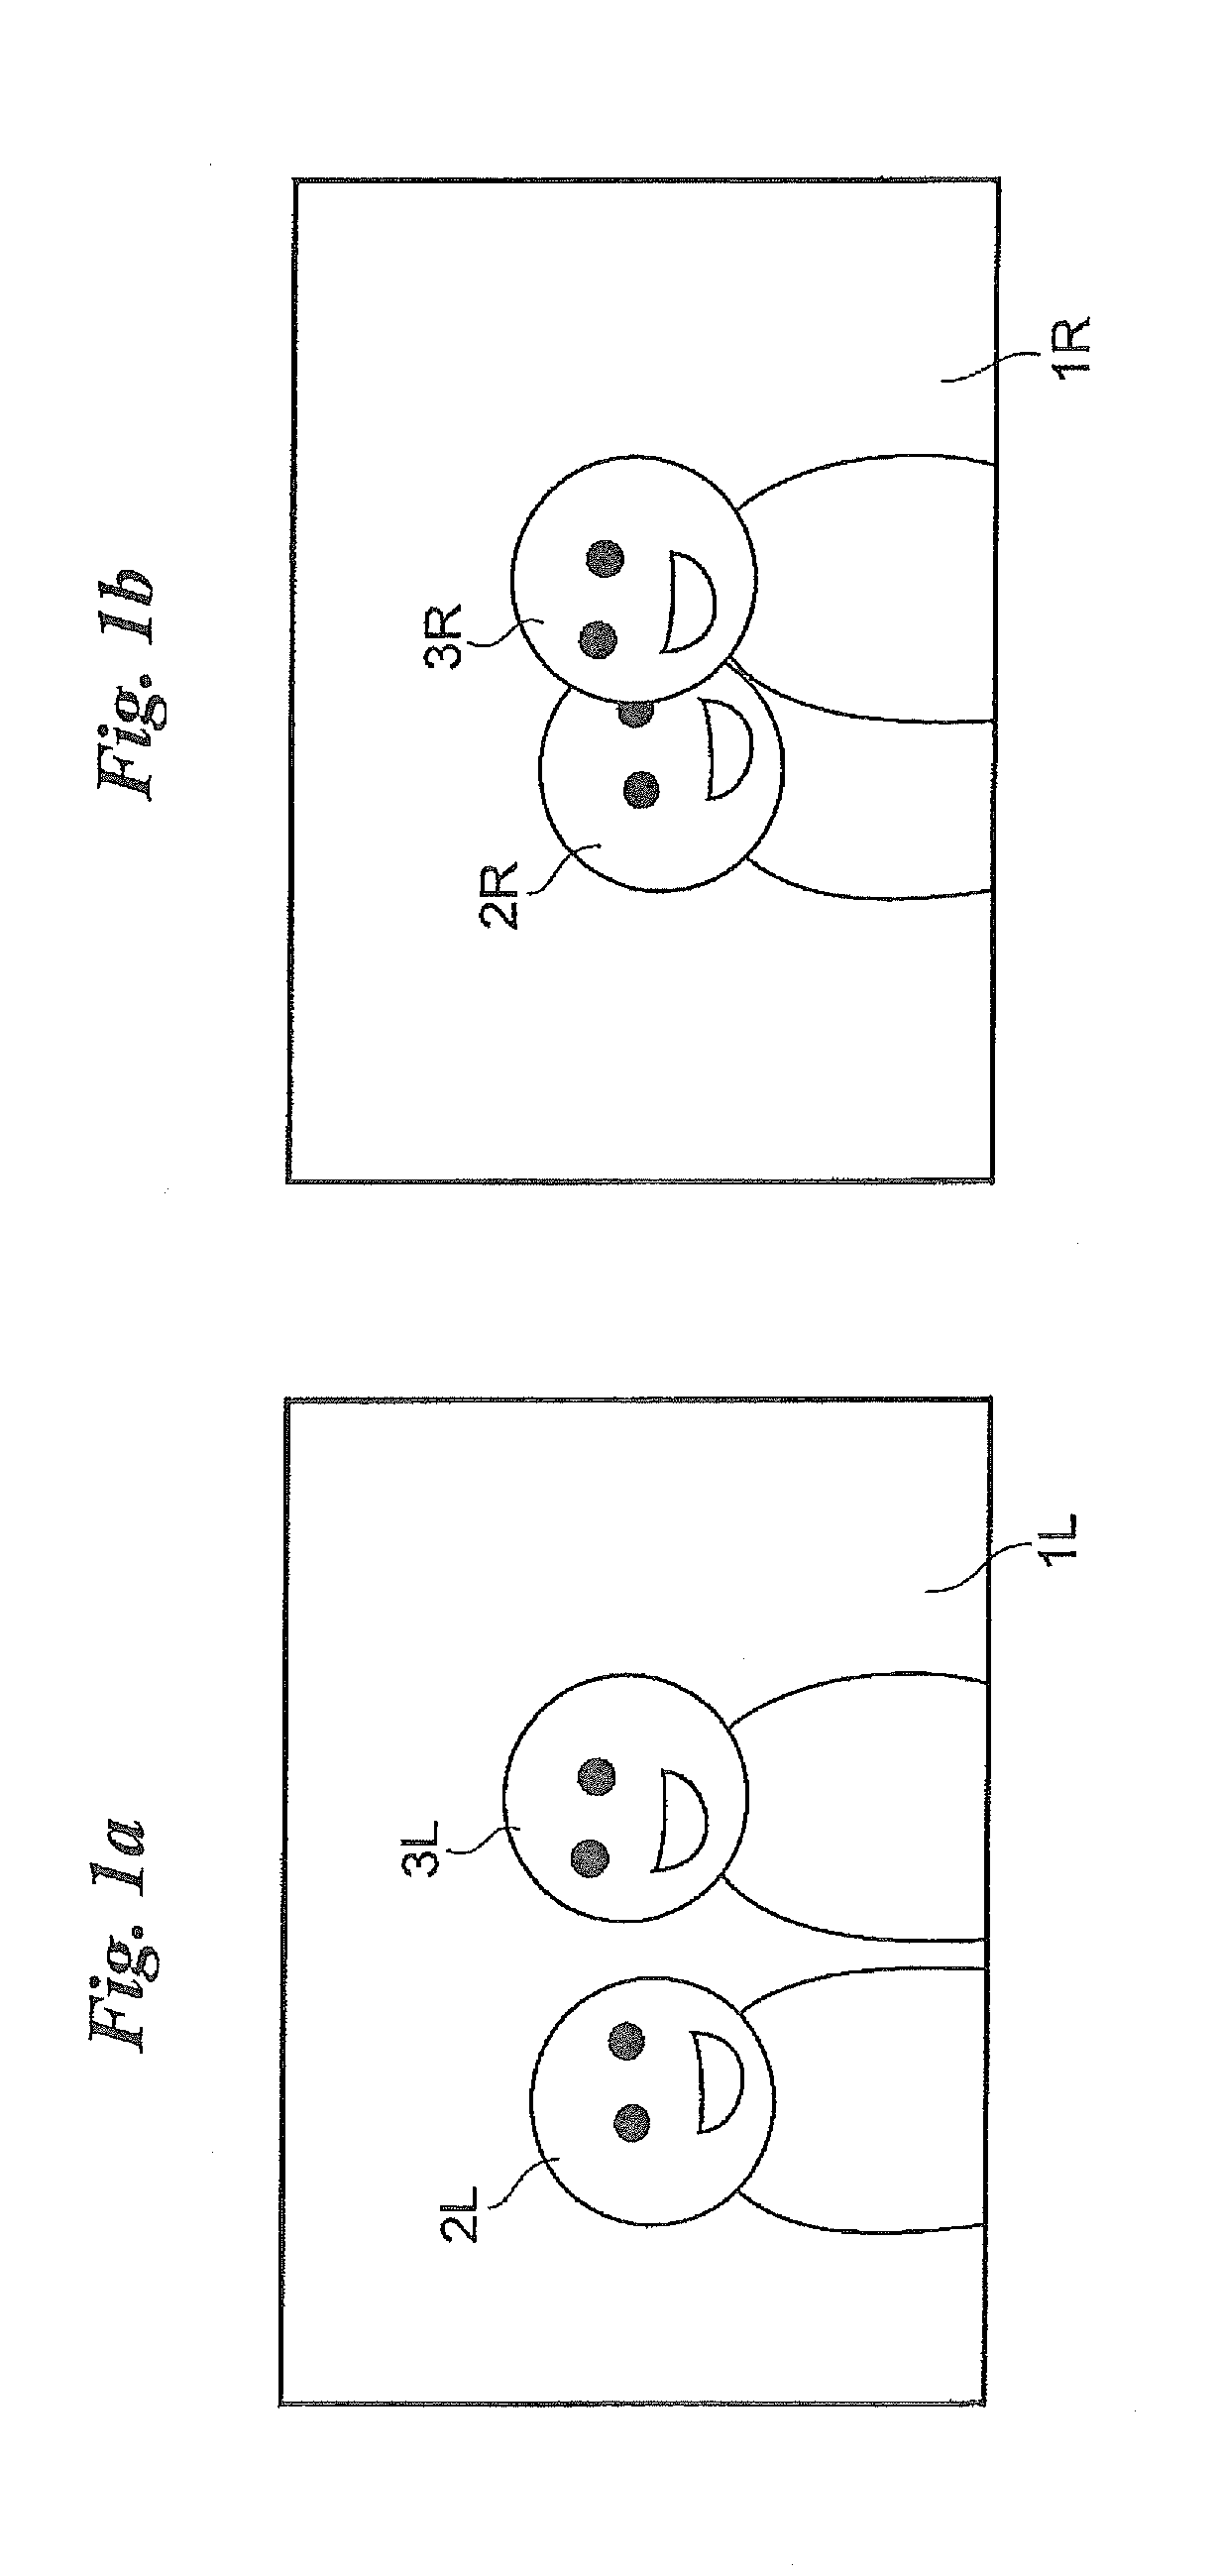 Representative image decision apparatus, image compression apparatus, and methods and programs for controlling operation of same